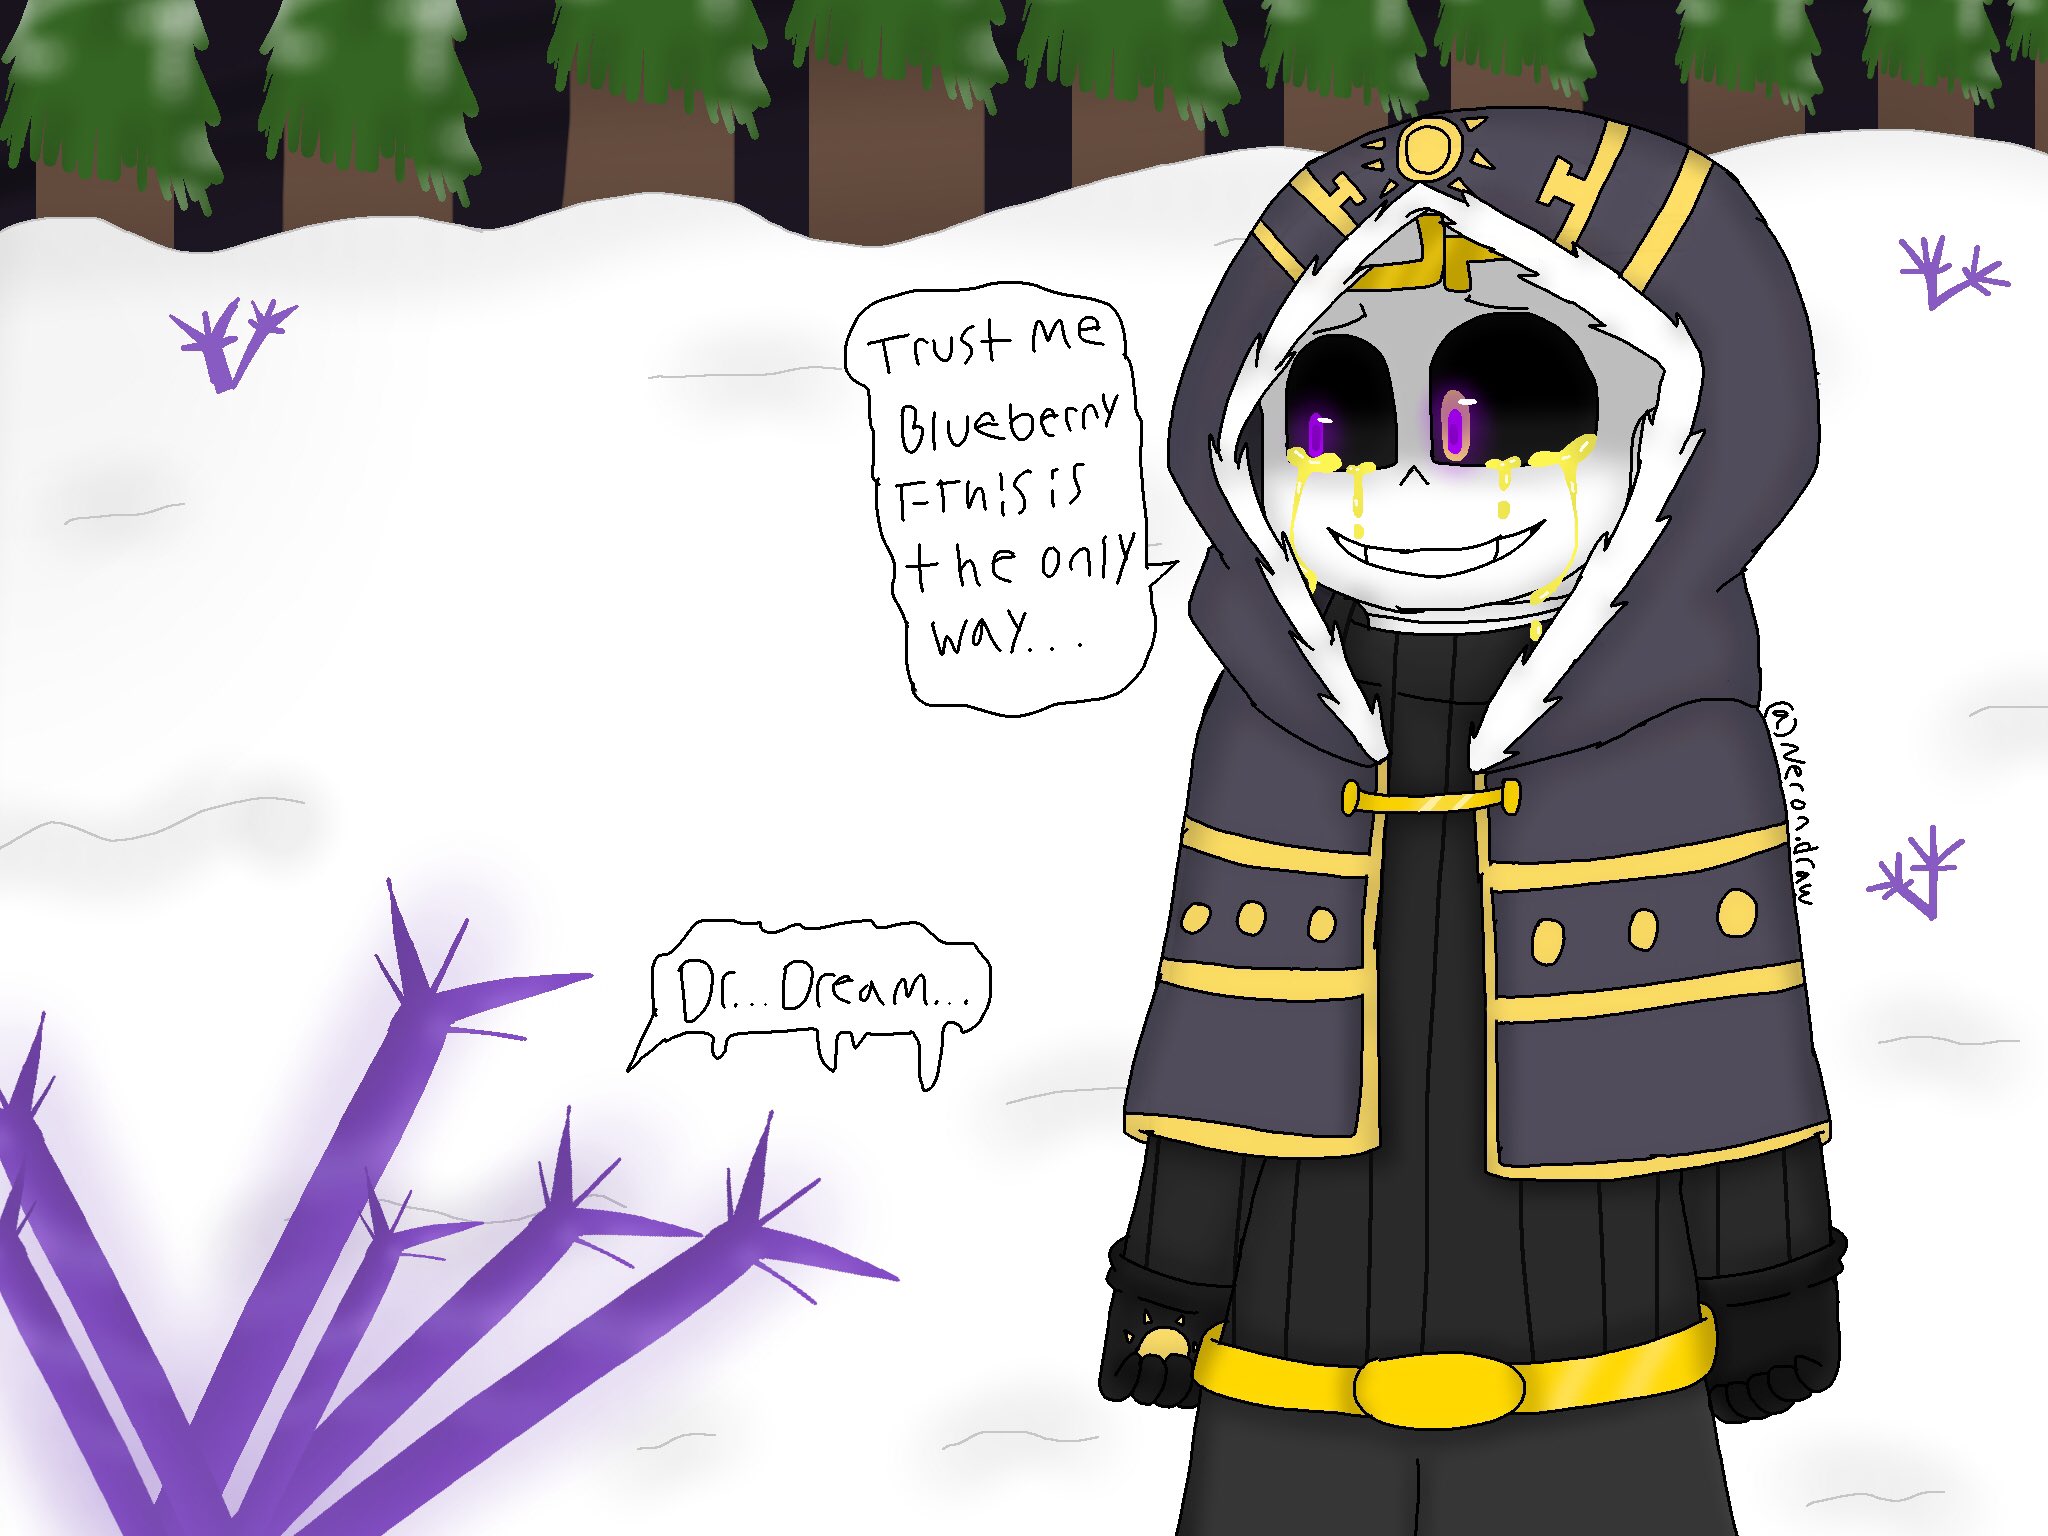 IbisPaintX-ink on X: Trust me blueberry t-this is the only Here's a  drawing of dust Dream and swap sans/blueberry and this drawing about Dream  is going to different AU to gain LV/EXP. #